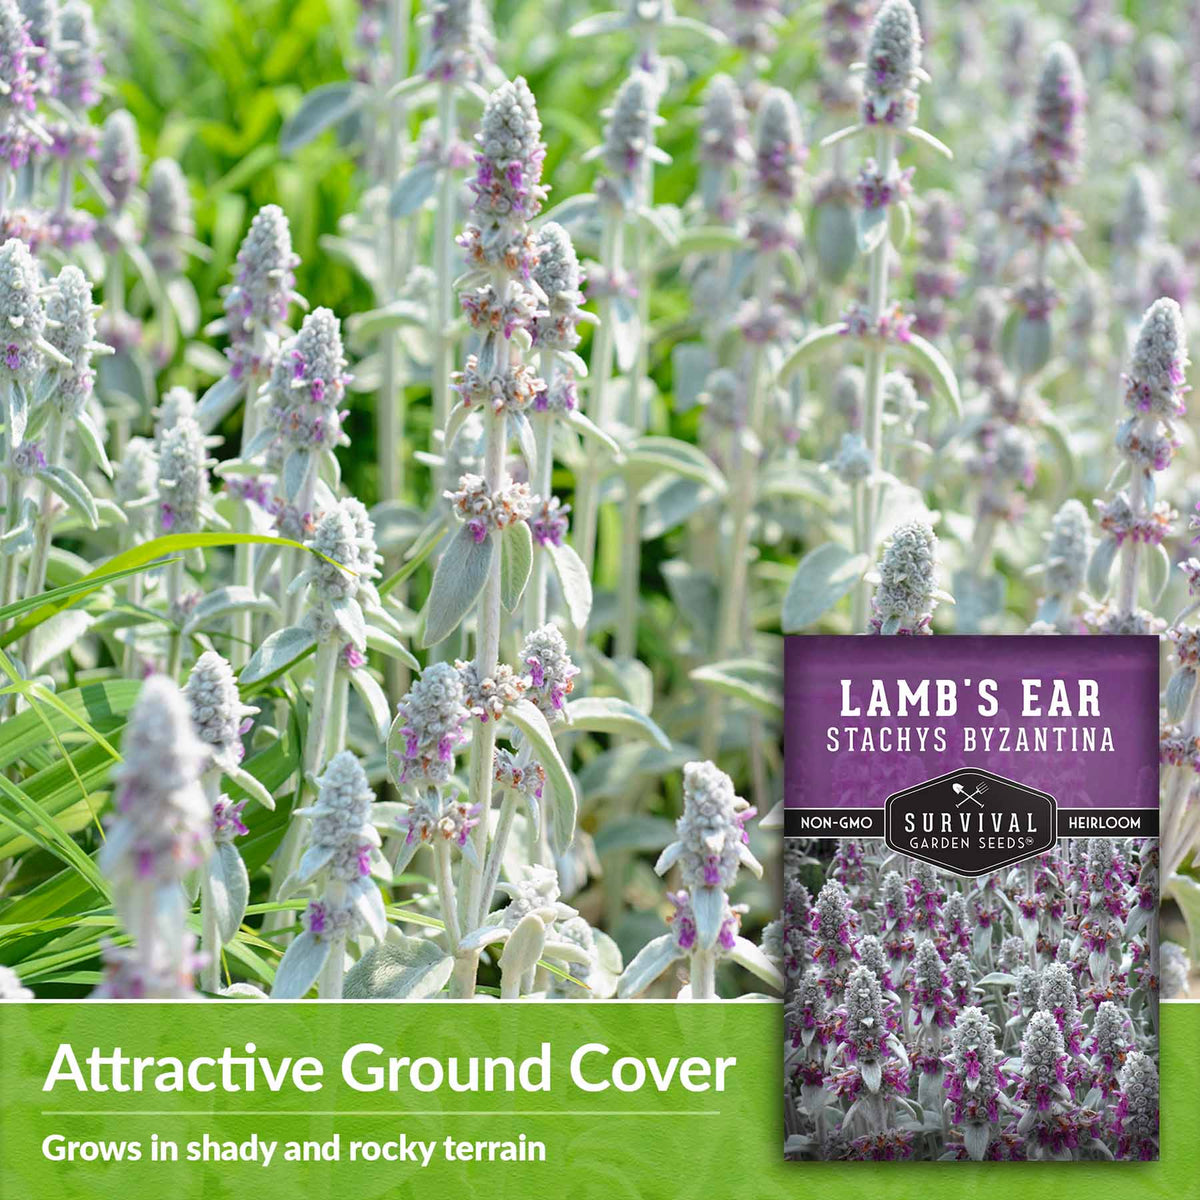 Attractive ground cover - grows in shady and rocky terrain